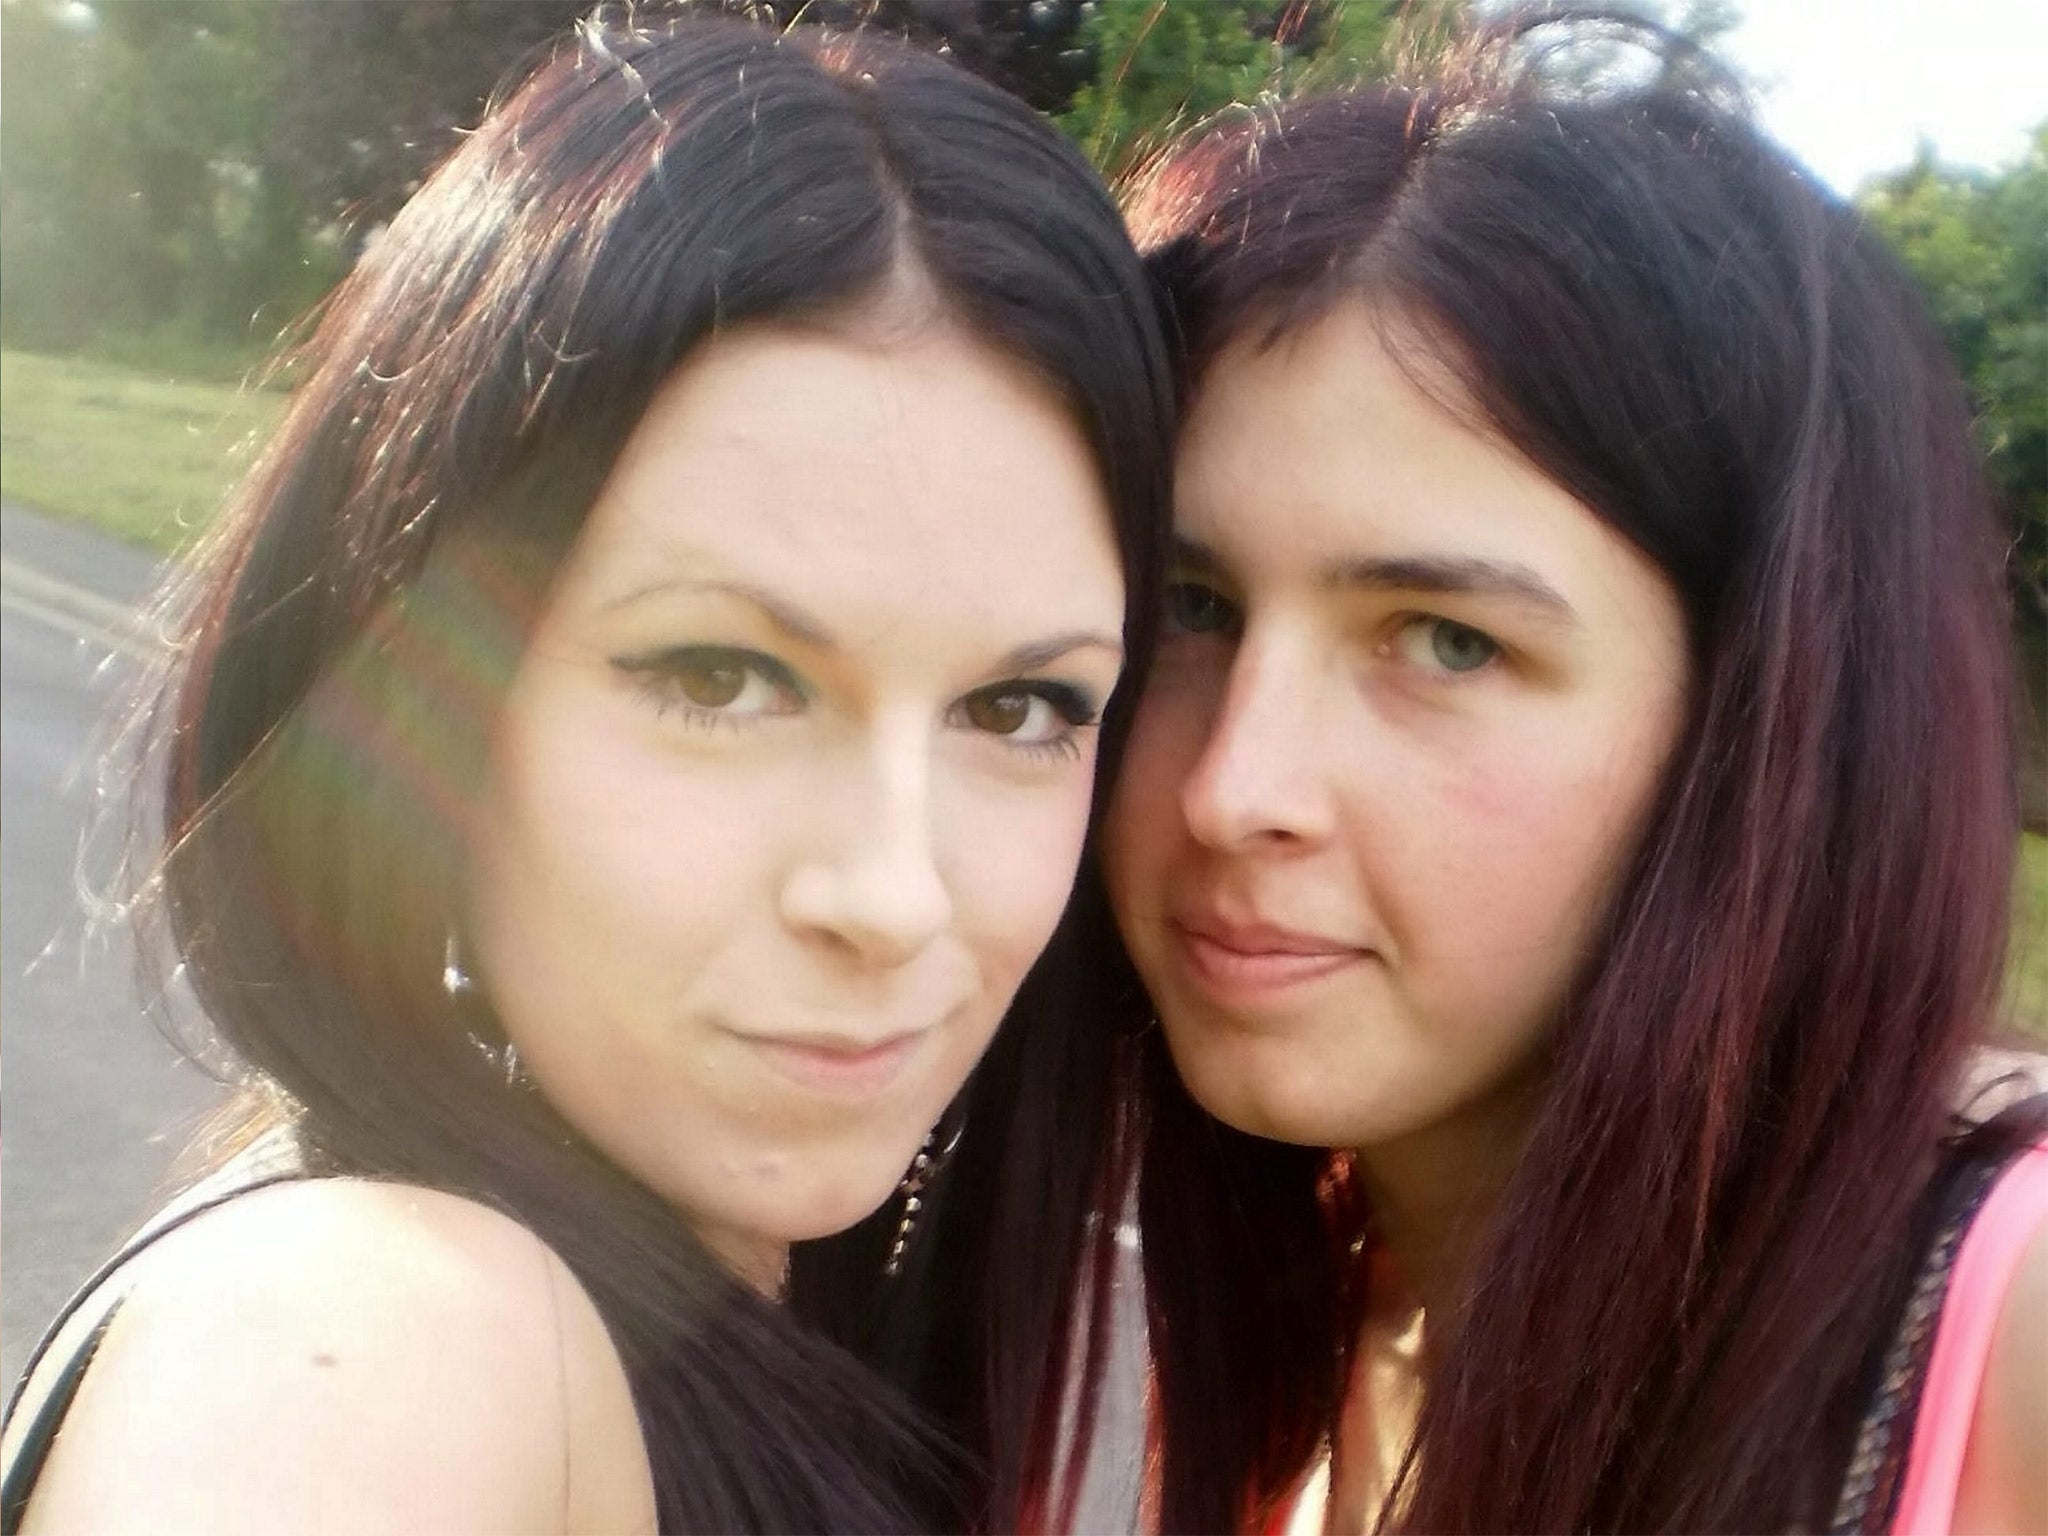 Milly Caller (right) is charged with assisting Emma Crossman's (left) suicide